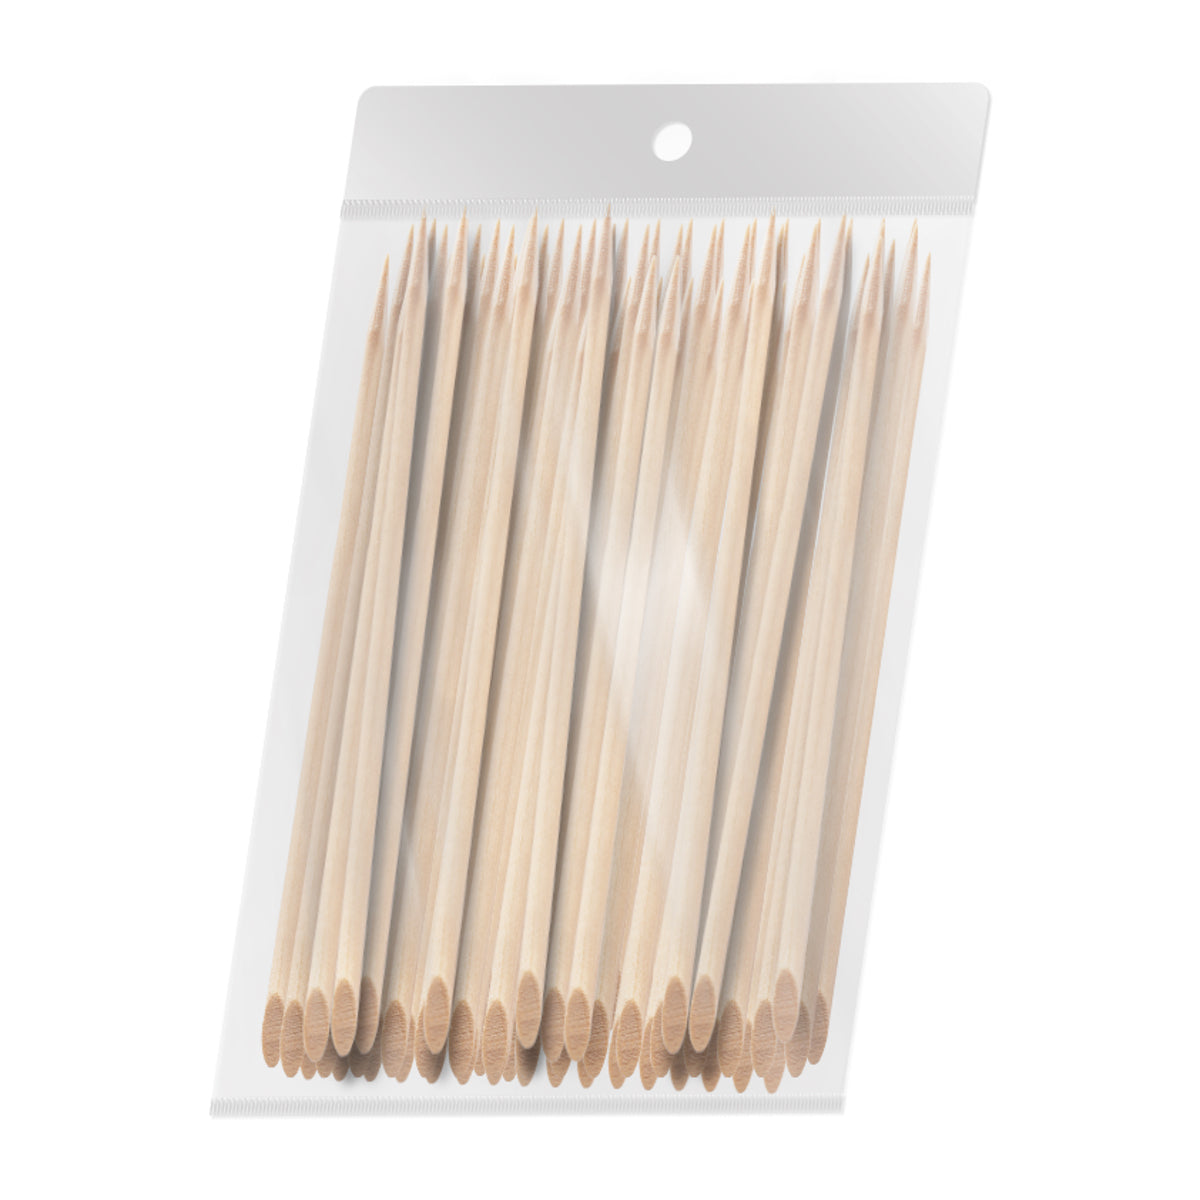 Pack of 100 wooden sticks for manicure cuticles 15 cm OCHO NAILS